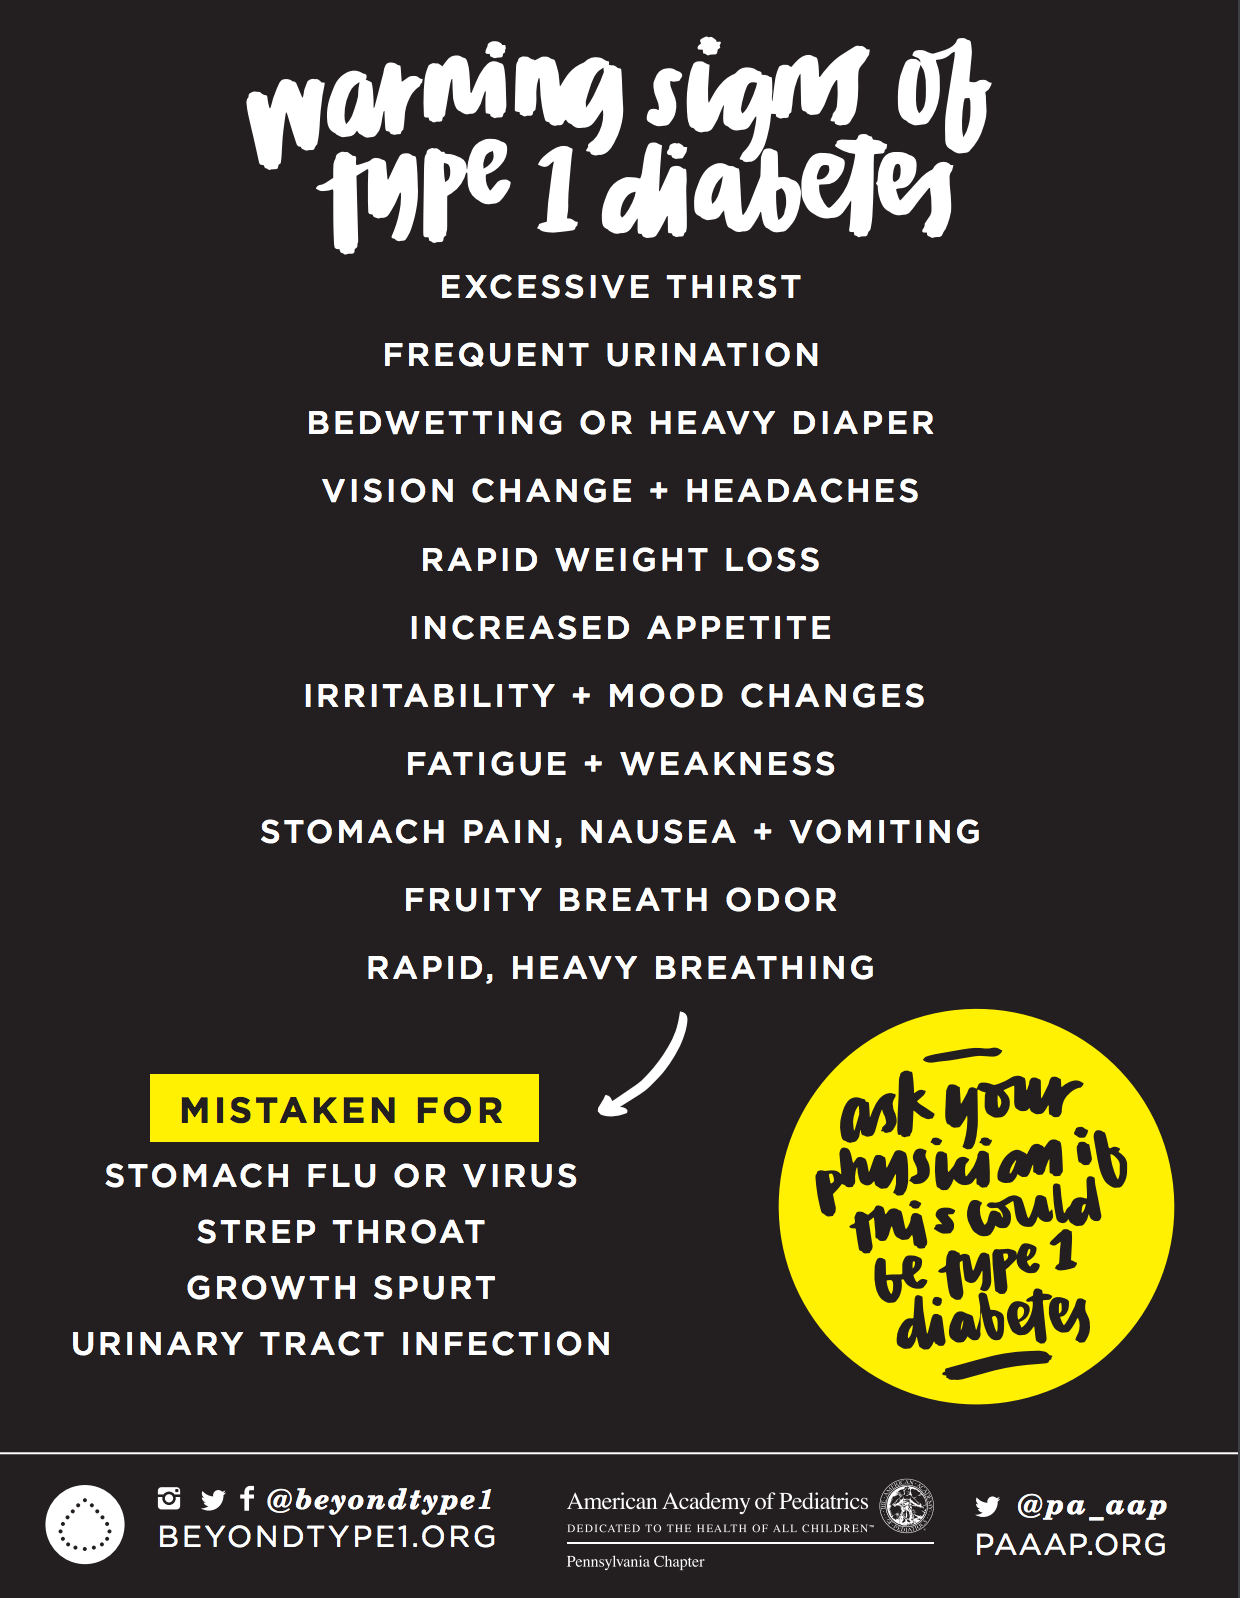 Beyond Type 1 poster explaining the warning signs of someone may be living with Type 1 Diabetes.